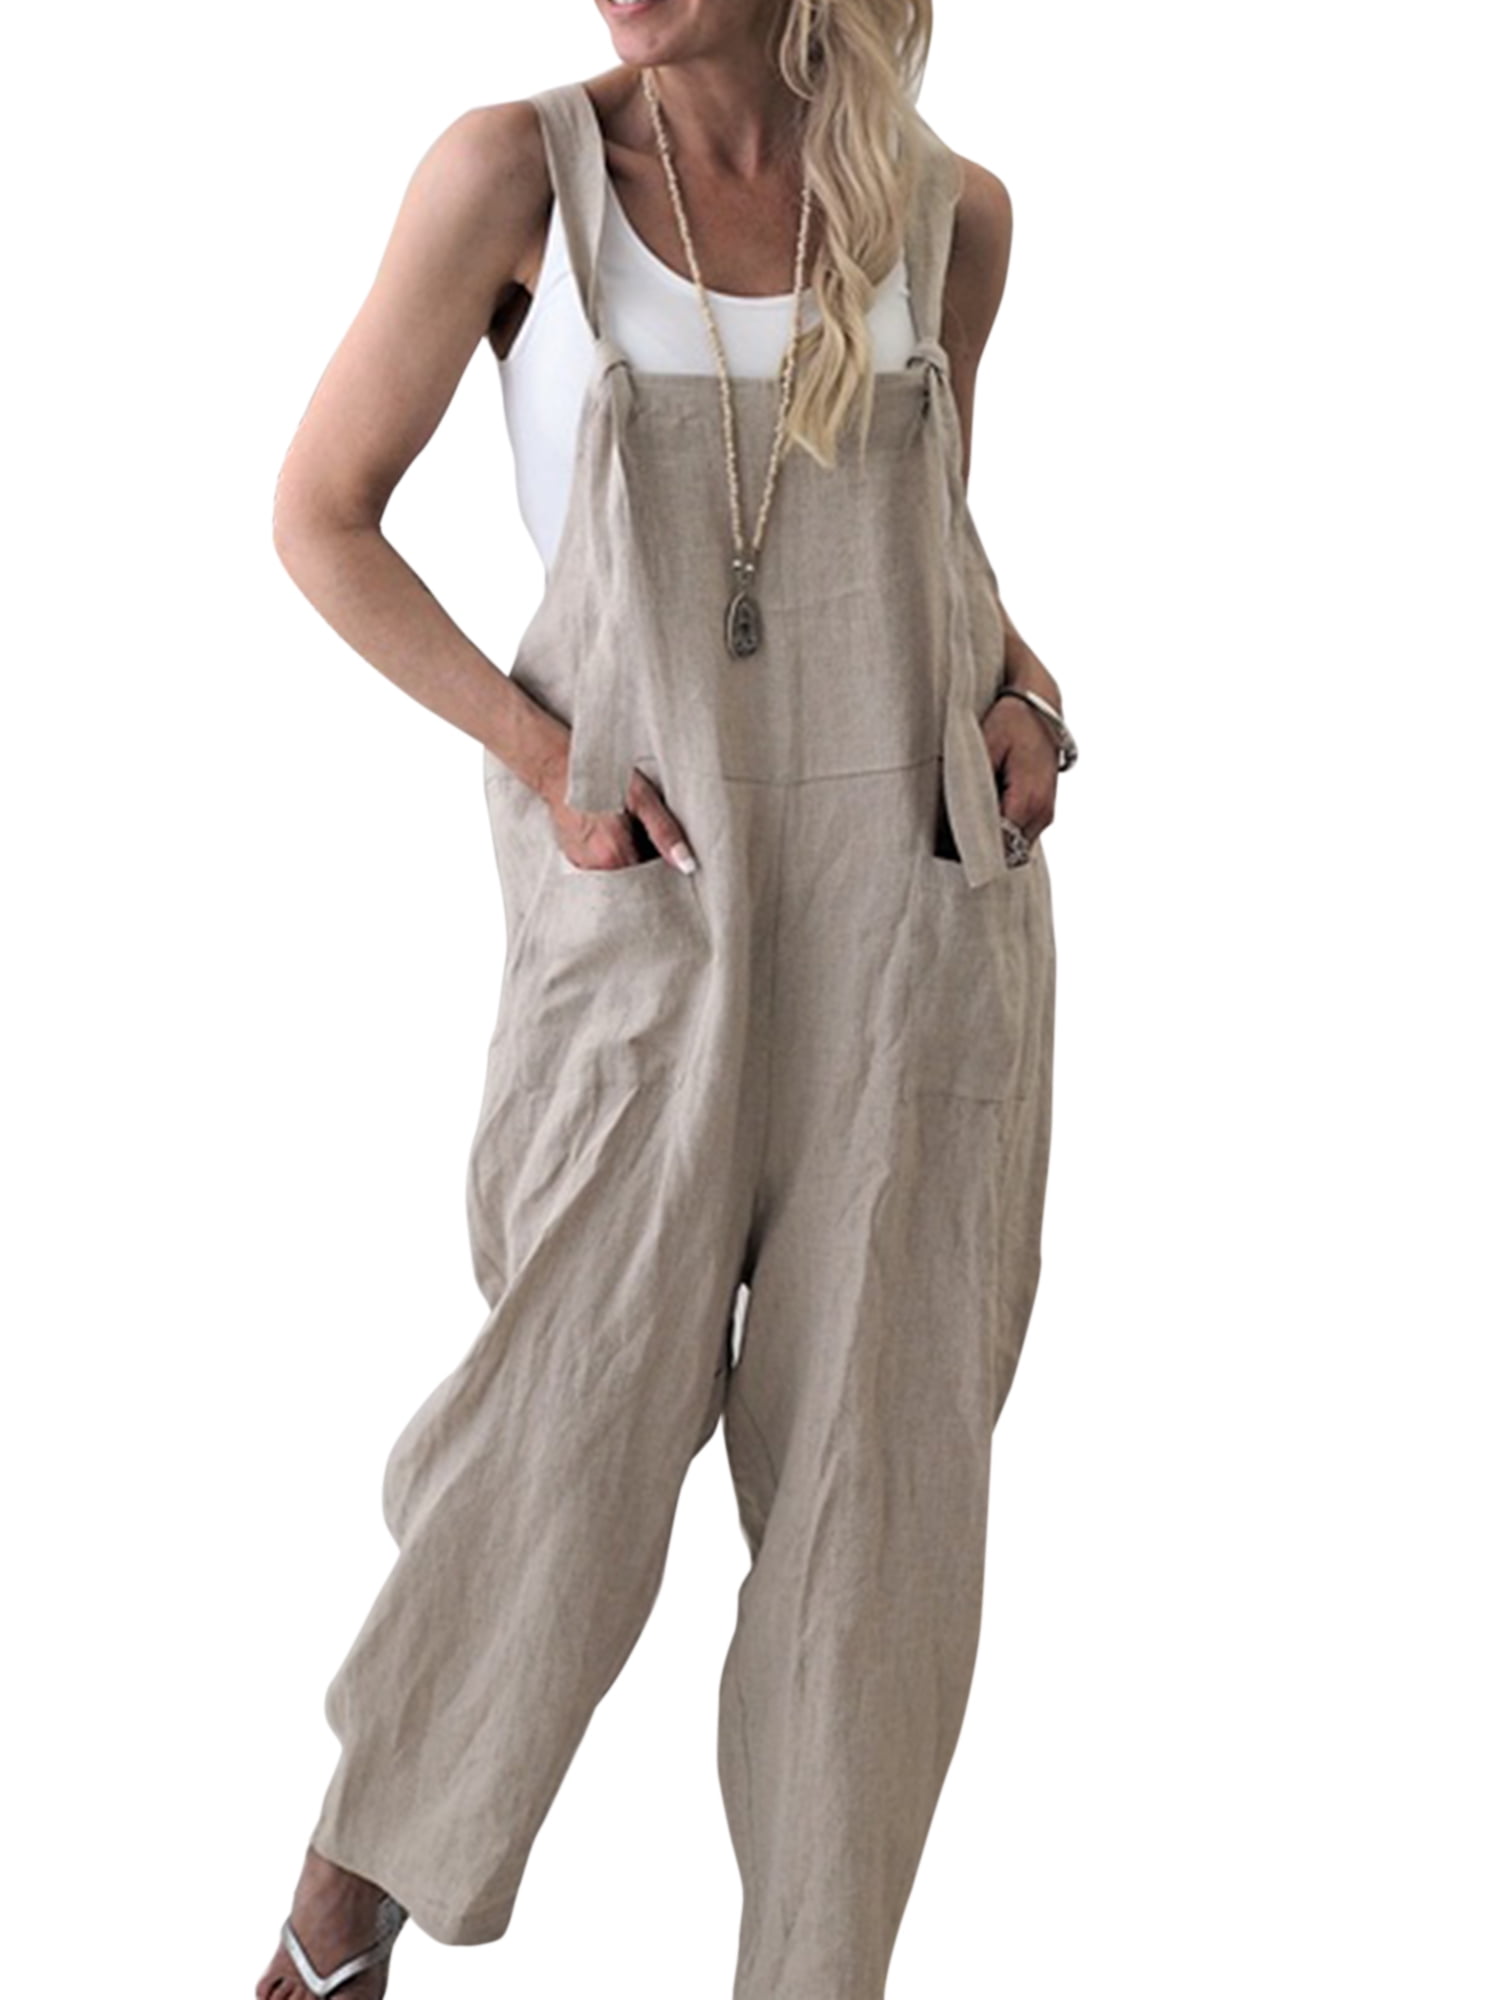 Jumpsuits for Women Women Casual Summer Baggy Wide Leg Overalls Plus Size Jumpsuits Overalls Rompers Harem Pants 